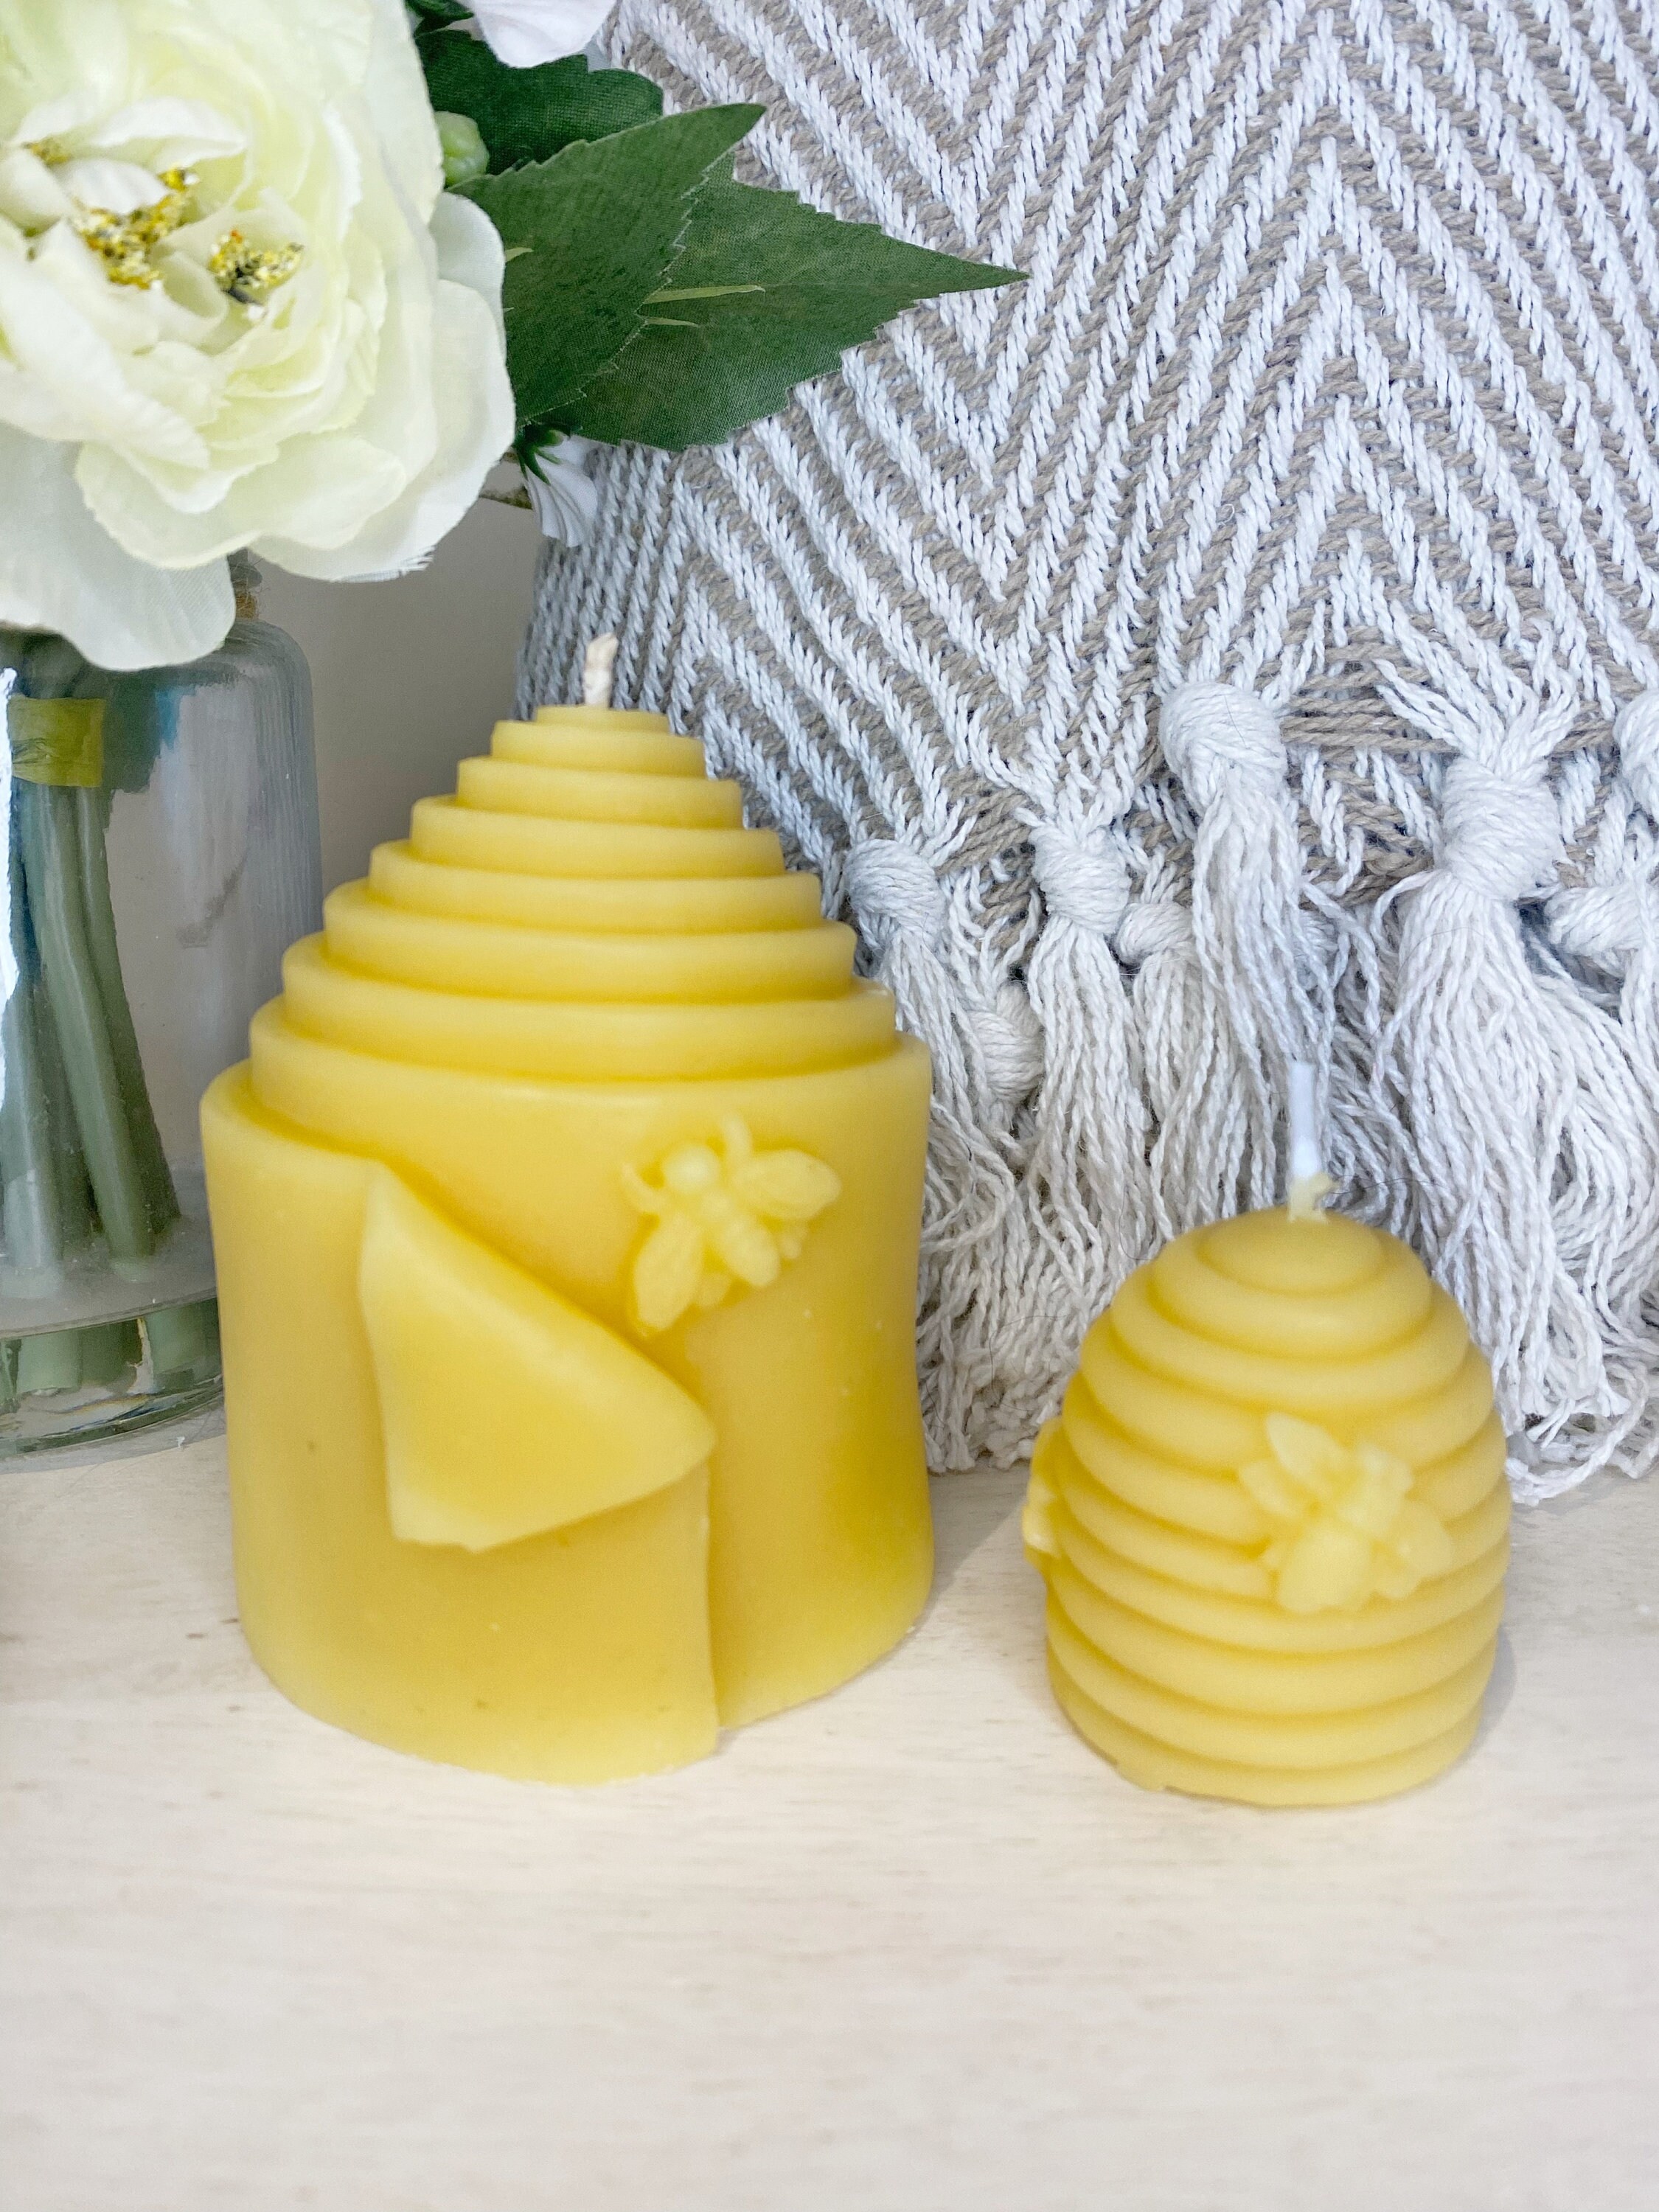 Honey Bee Beeswax Candles/decorative Candles/bee Hive Candles/bee  Candles/honeycomb Candles/handmade/candle Gifts/made With 100% Beeswax. 